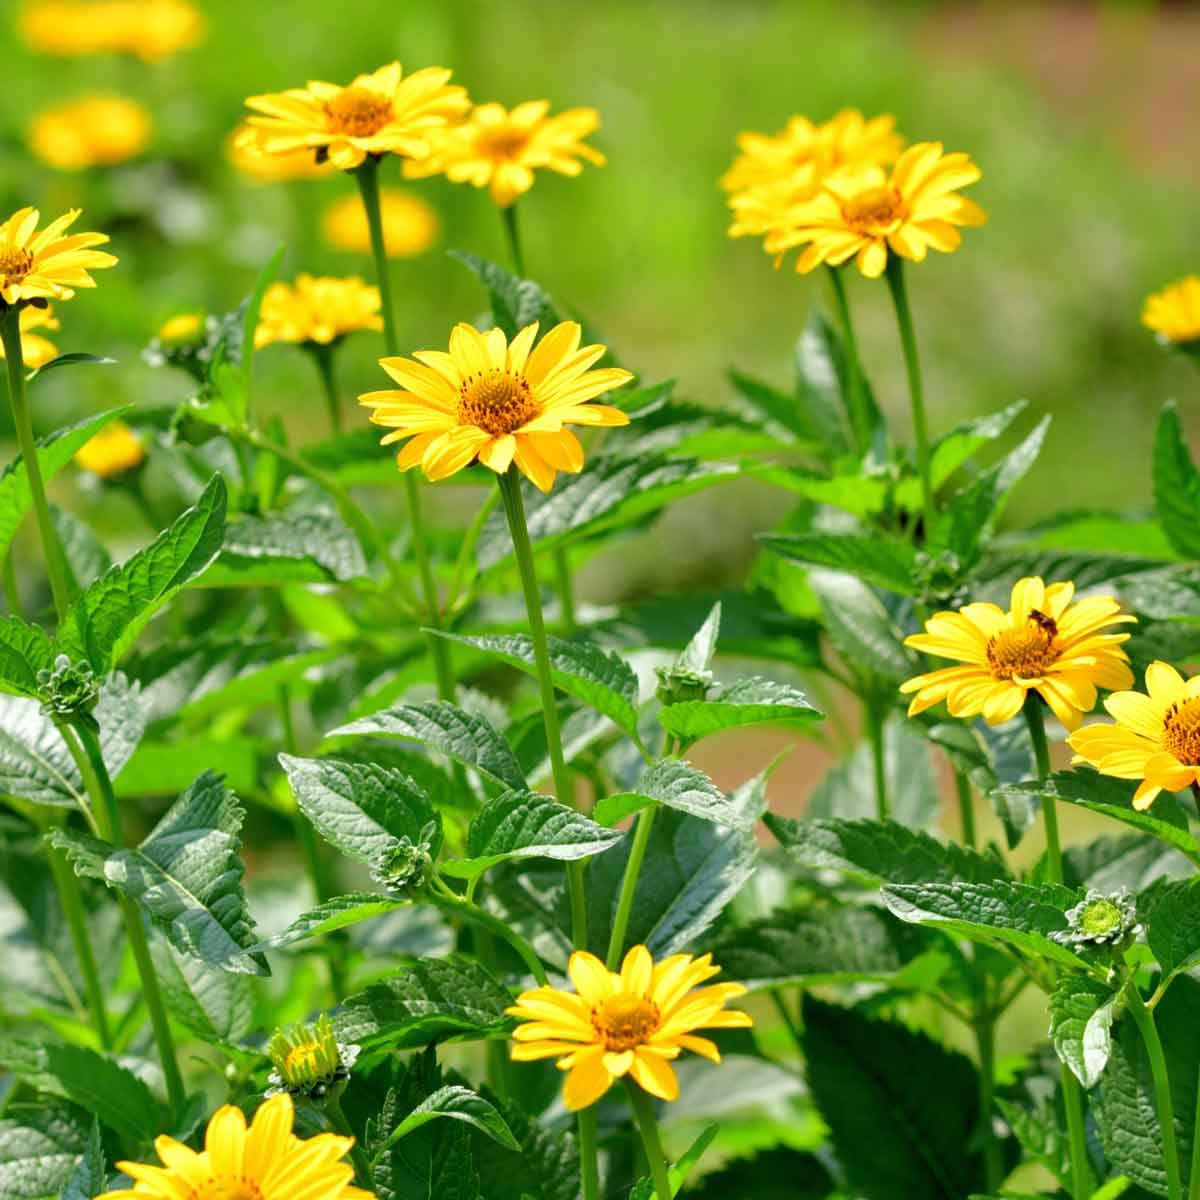 20 Best Perennials That Bloom Year After Year | The Family Handyman